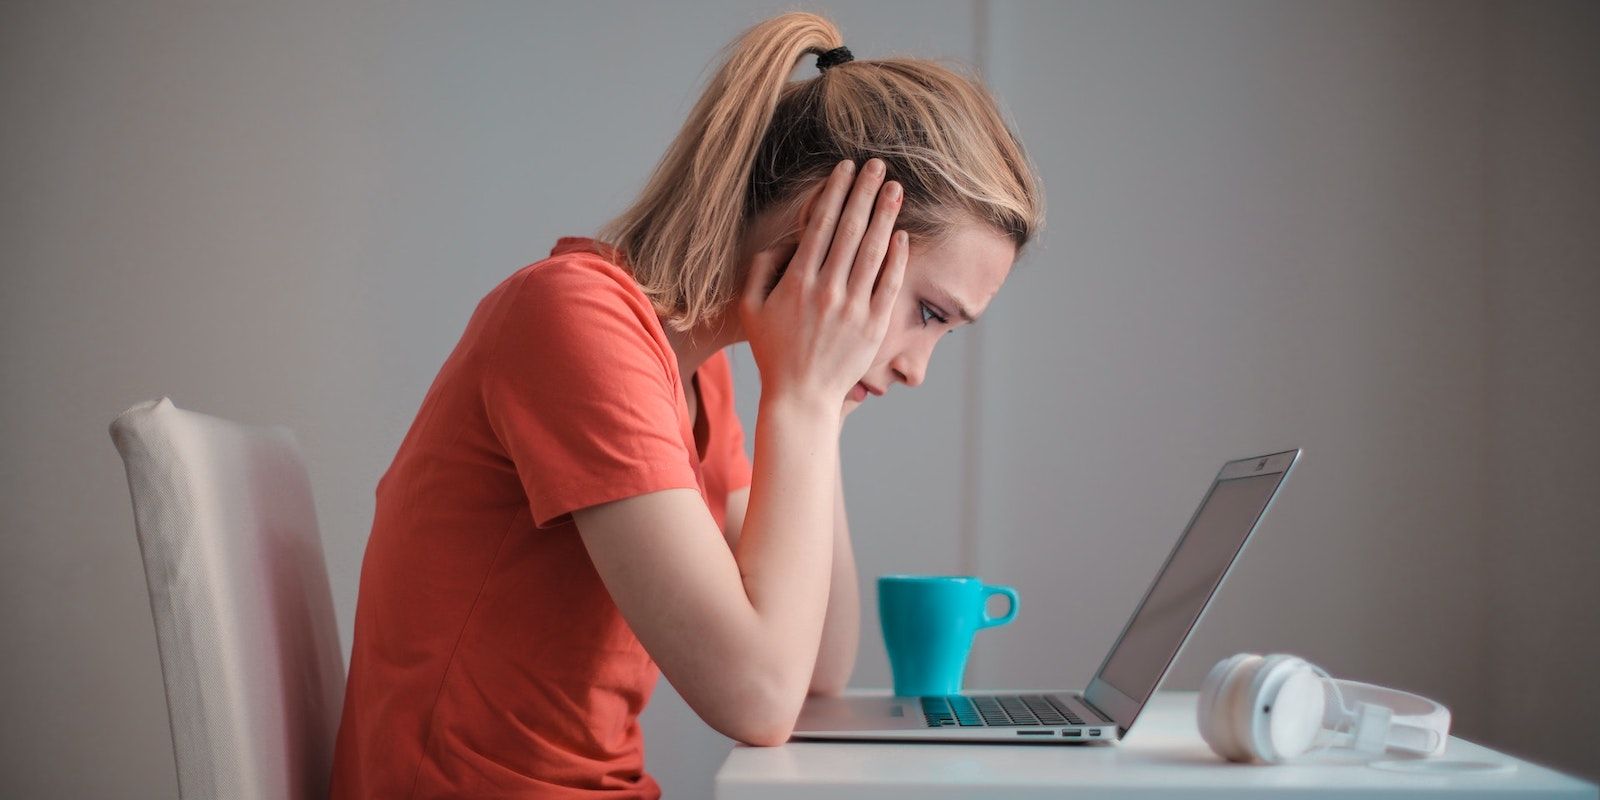 A Frustrated Woman Looking at Her Laptop 